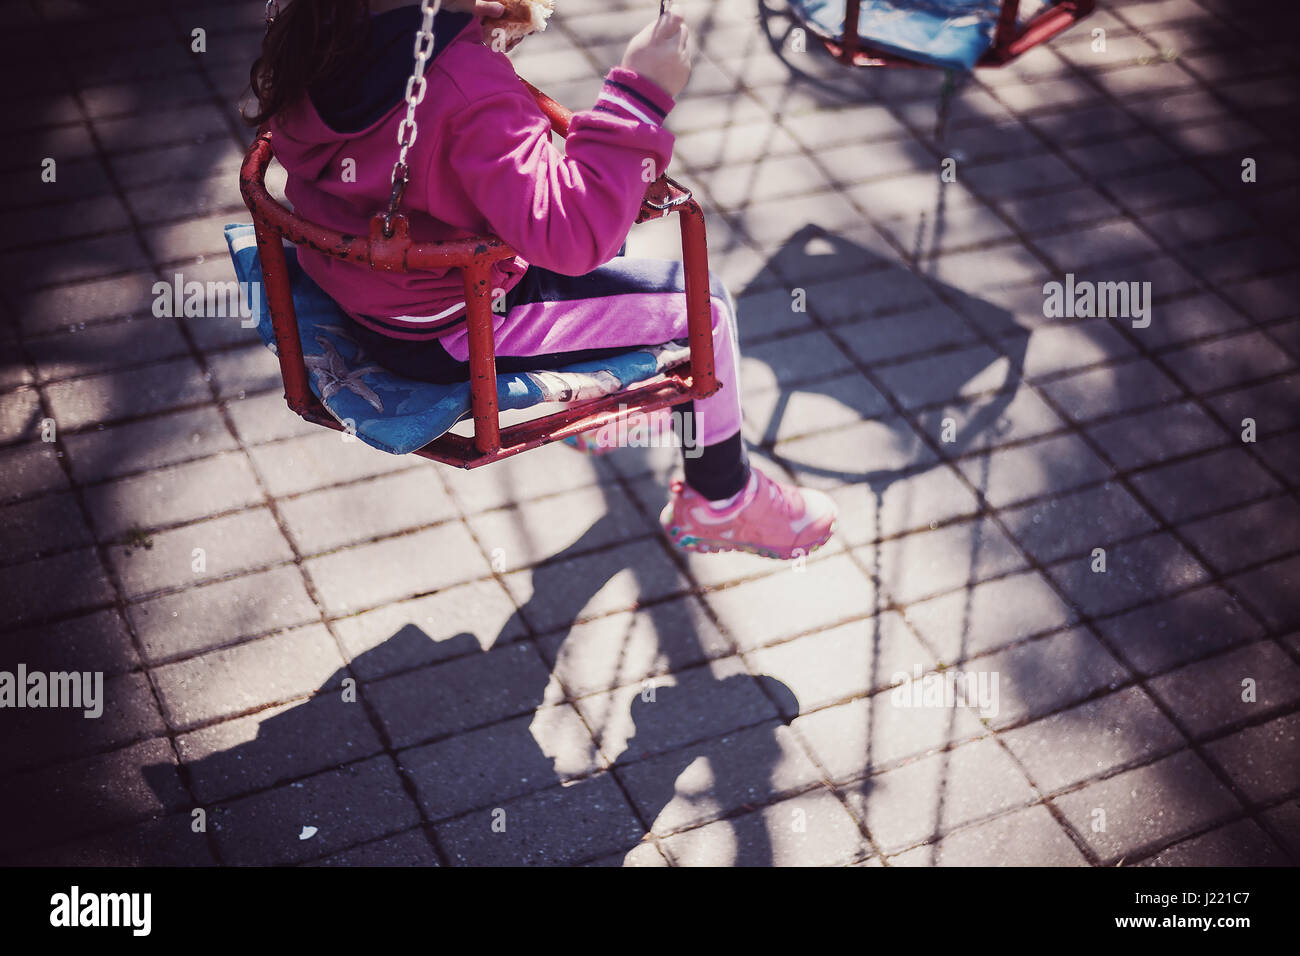 Part of a carousel for small children, little girl body part and seat. Stock Photo